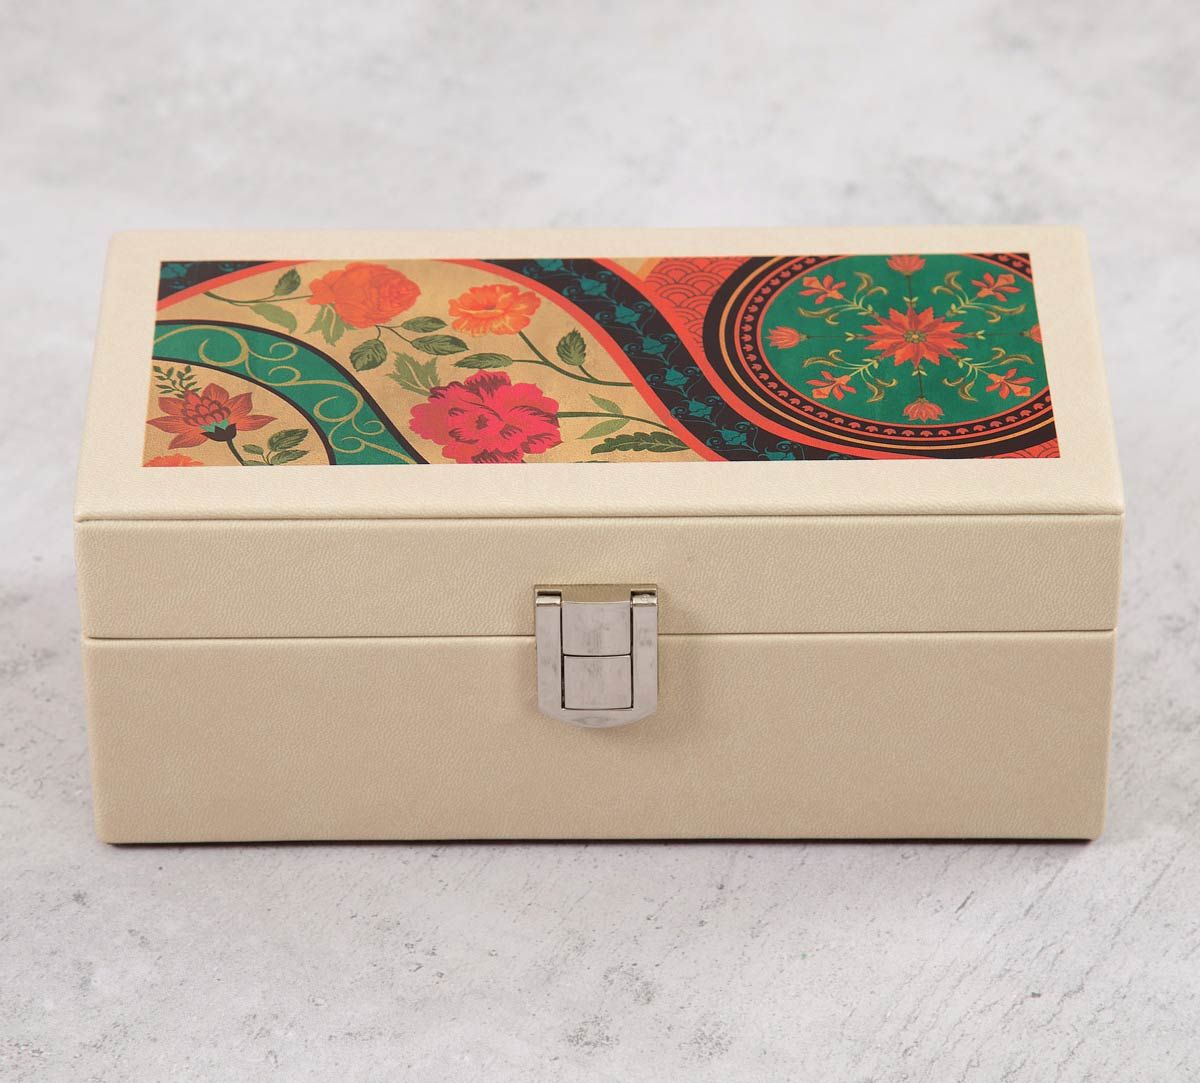 India Circus Floral Embroidery Leather Watch Box